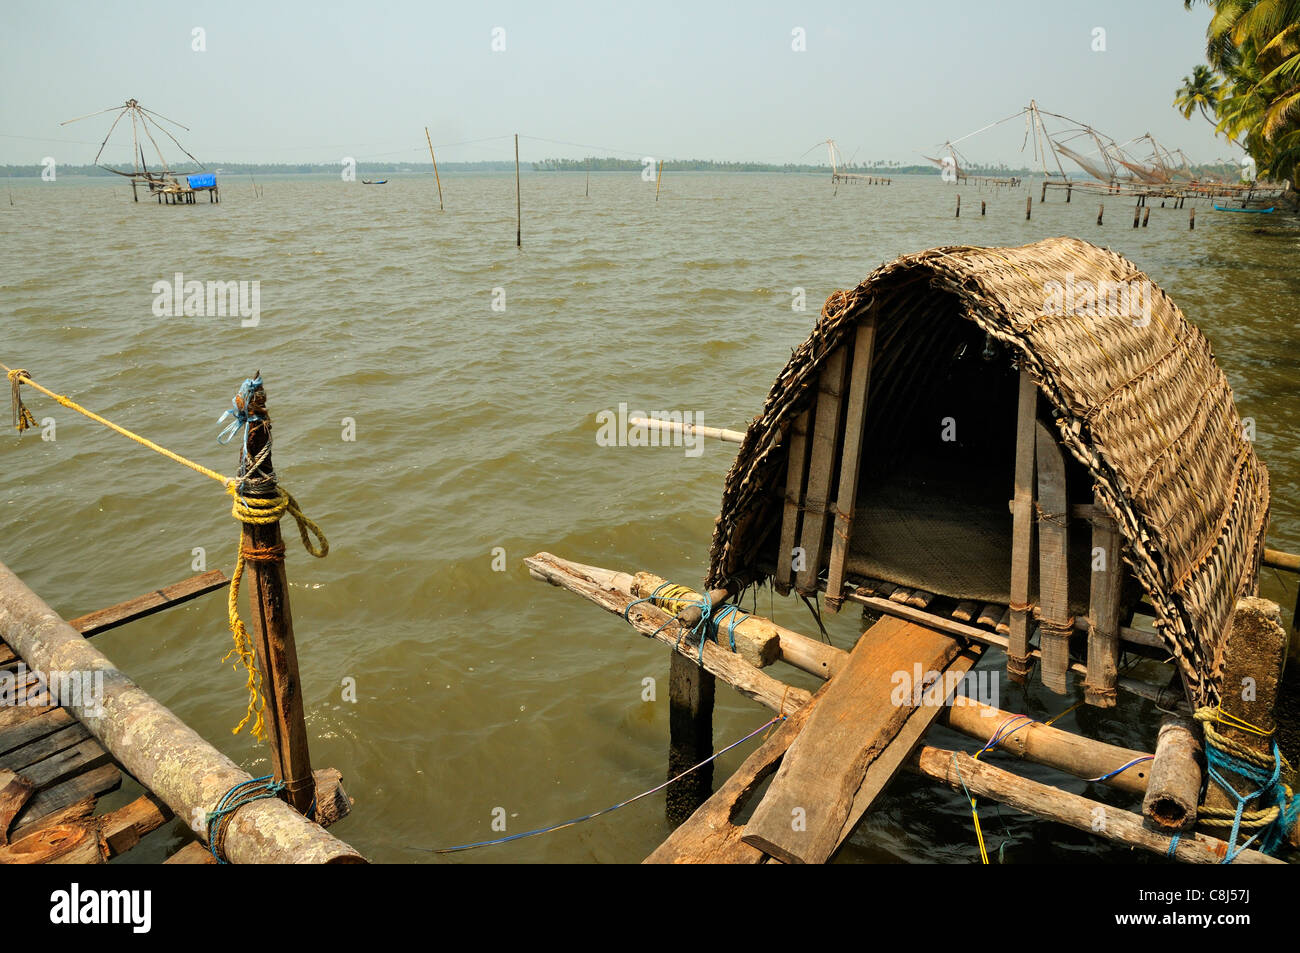 Chinese fishing nets on a tidal  lake near Fort Kochi ( Cochin ) showing the nets and basic shelter for the fishermen, Kerala, India Stock Photo